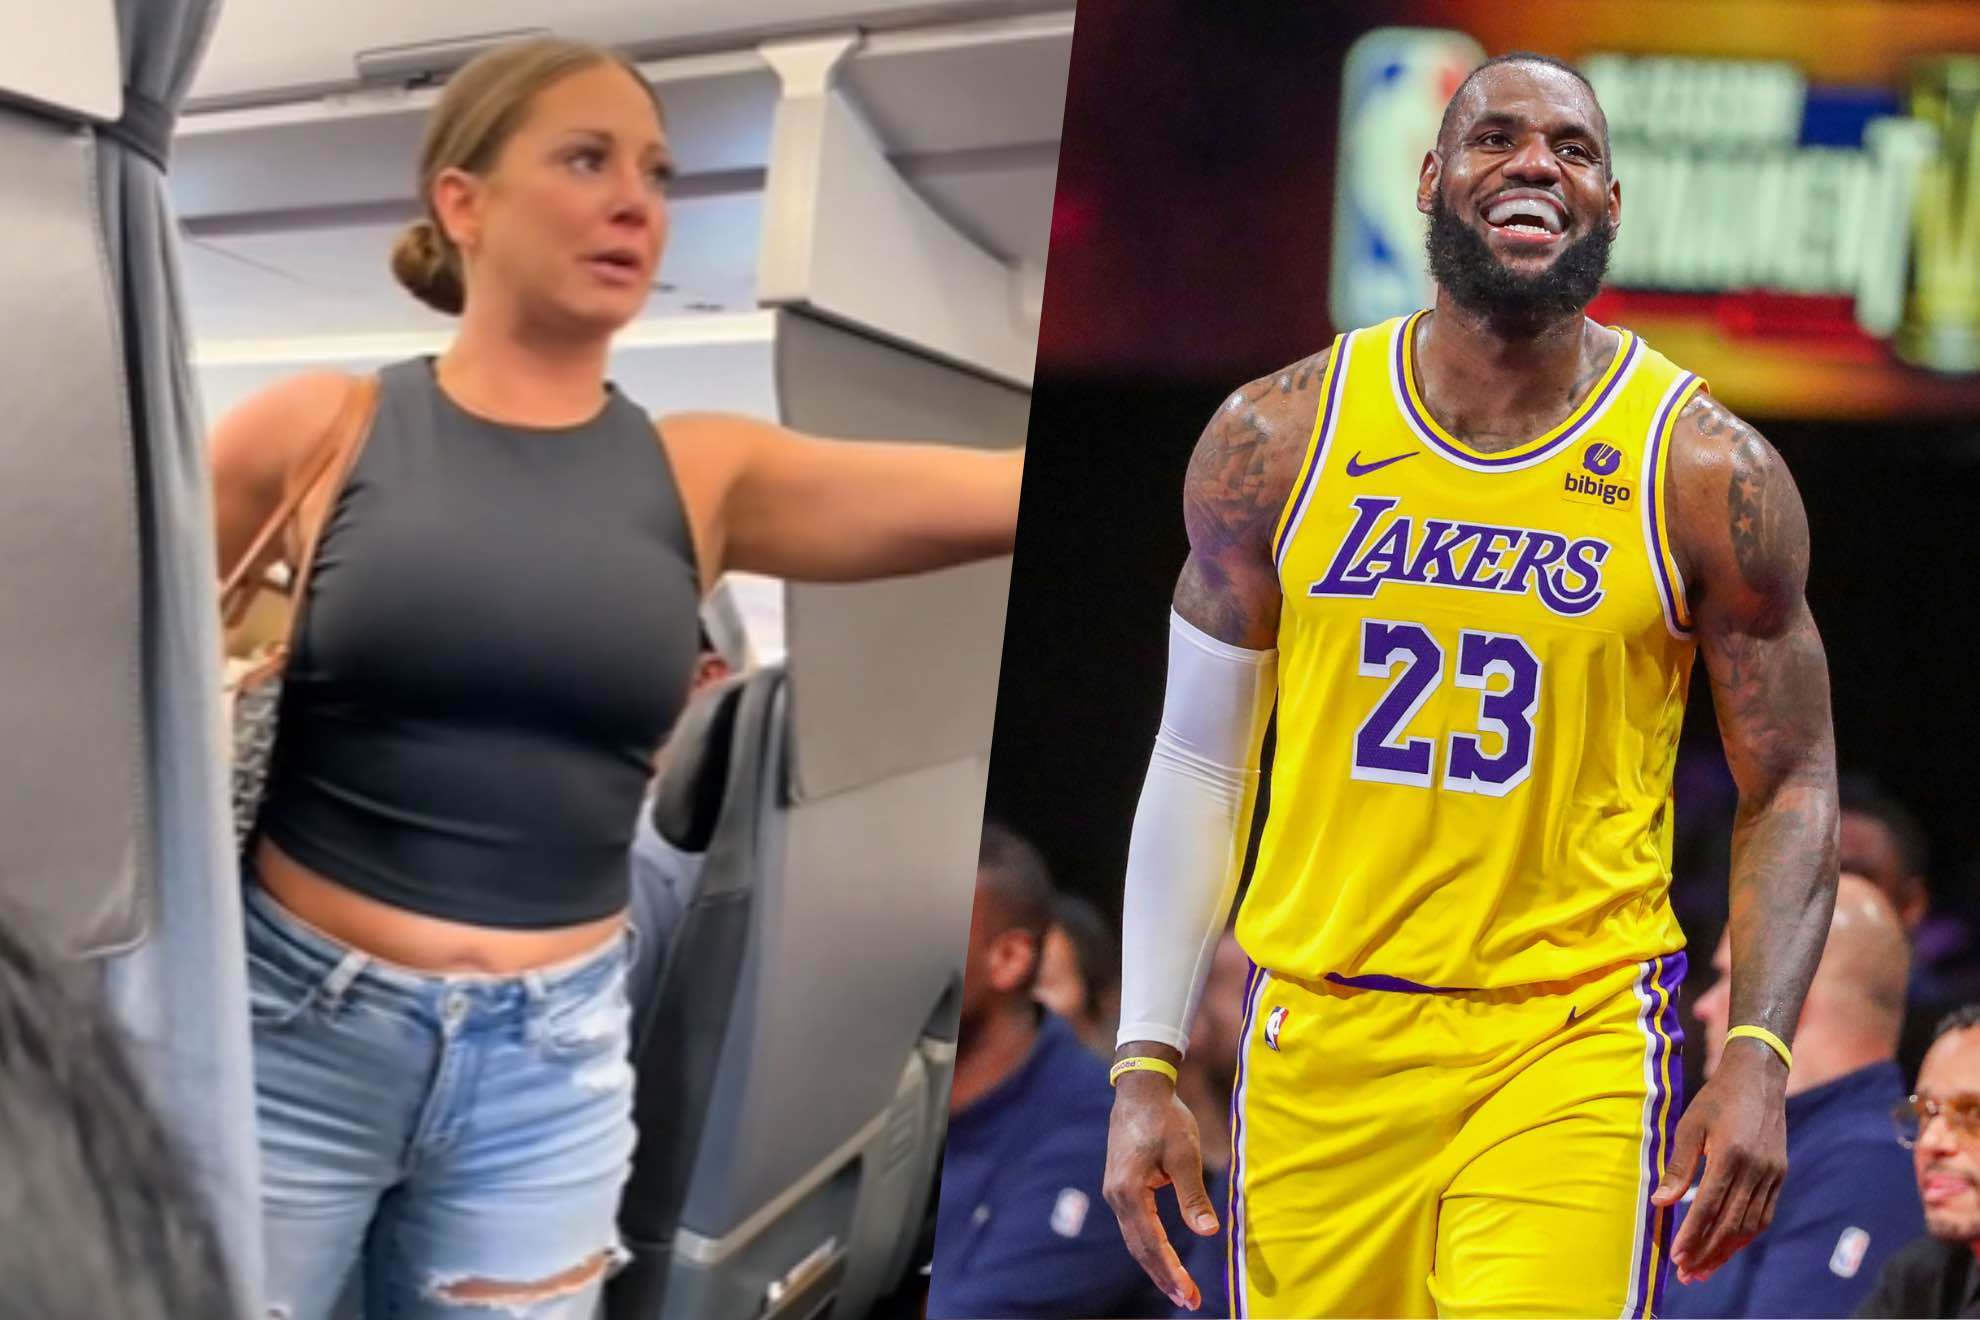 LeBron James used the viral plane lady video in an Instagram post